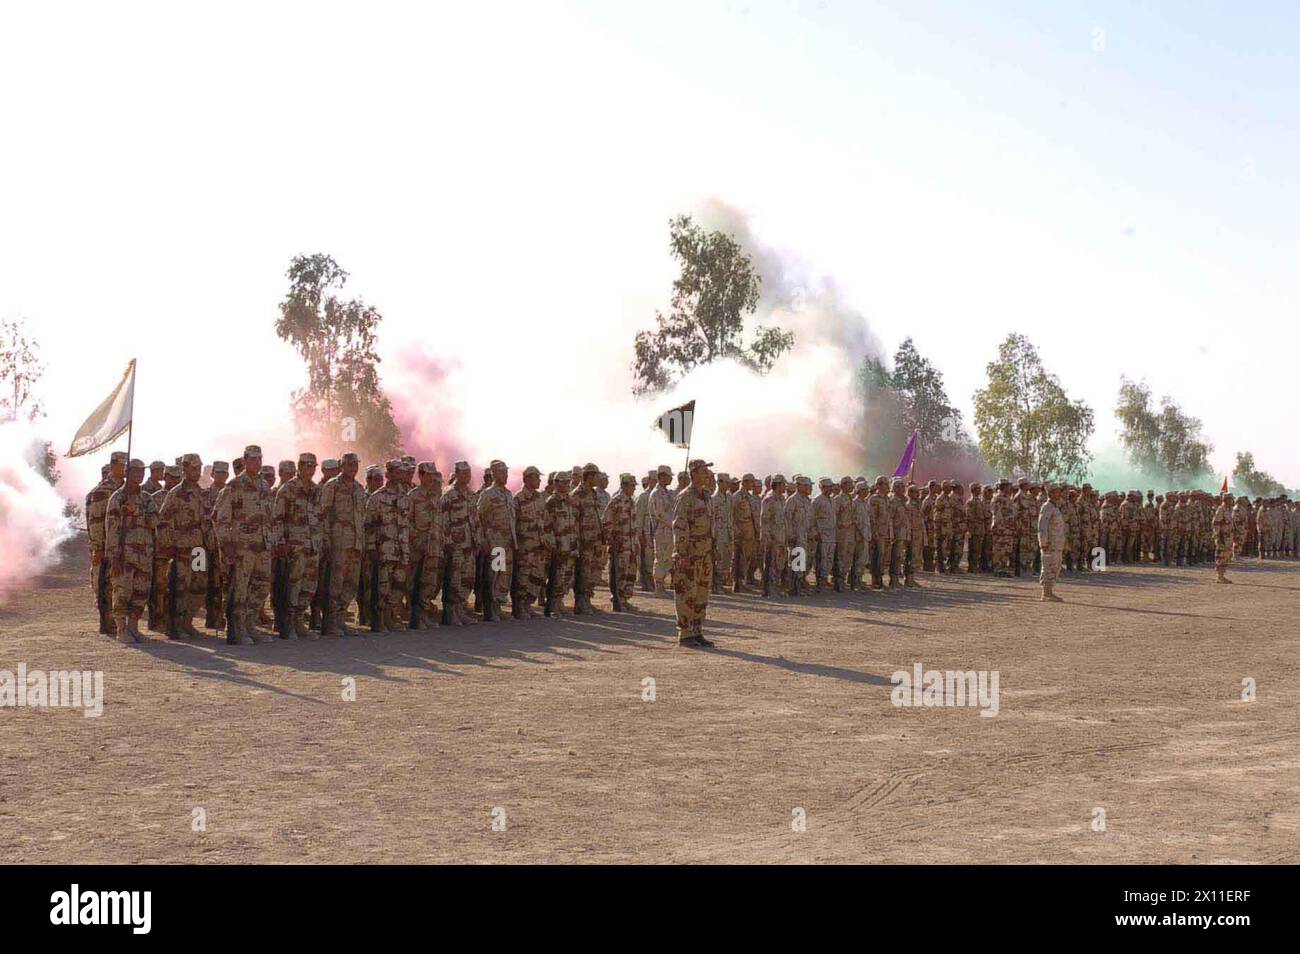 Nine platoons of Iraqi National Guard soldiers stand in formation at a graduation ceremony August 26 in Qayarrah, Iraq.  The soldiers participated in a four-week basic training course taught by Soldiers from Company C, 52nd Infantry Division, 3rd Brigade, 2nd Infantry Division (Stryker Brigade Combat Team) ca. August 26, 2004 Stock Photo